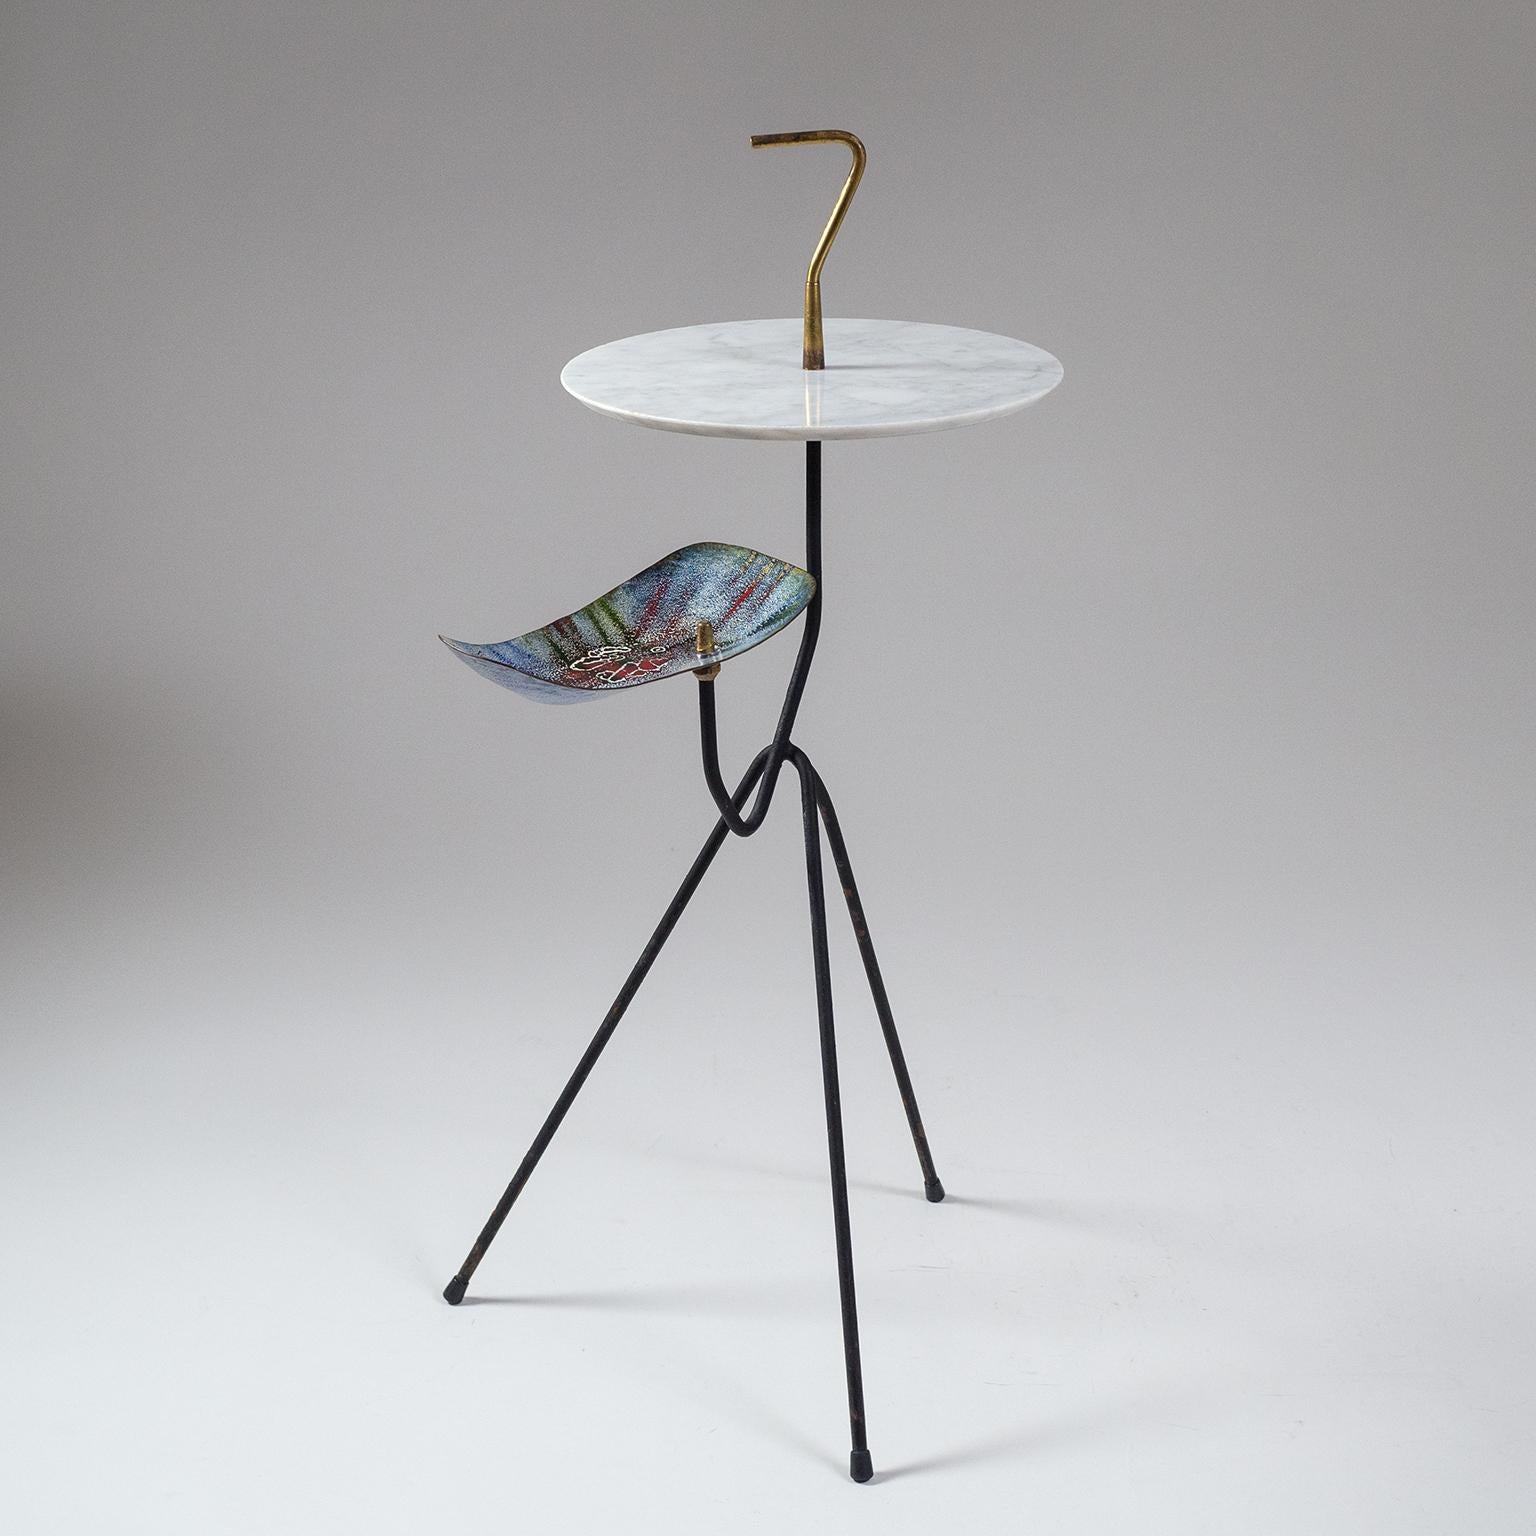 Sculptural Italian Side Table, 1950s, Marble, Brass and Enameled Copper 1